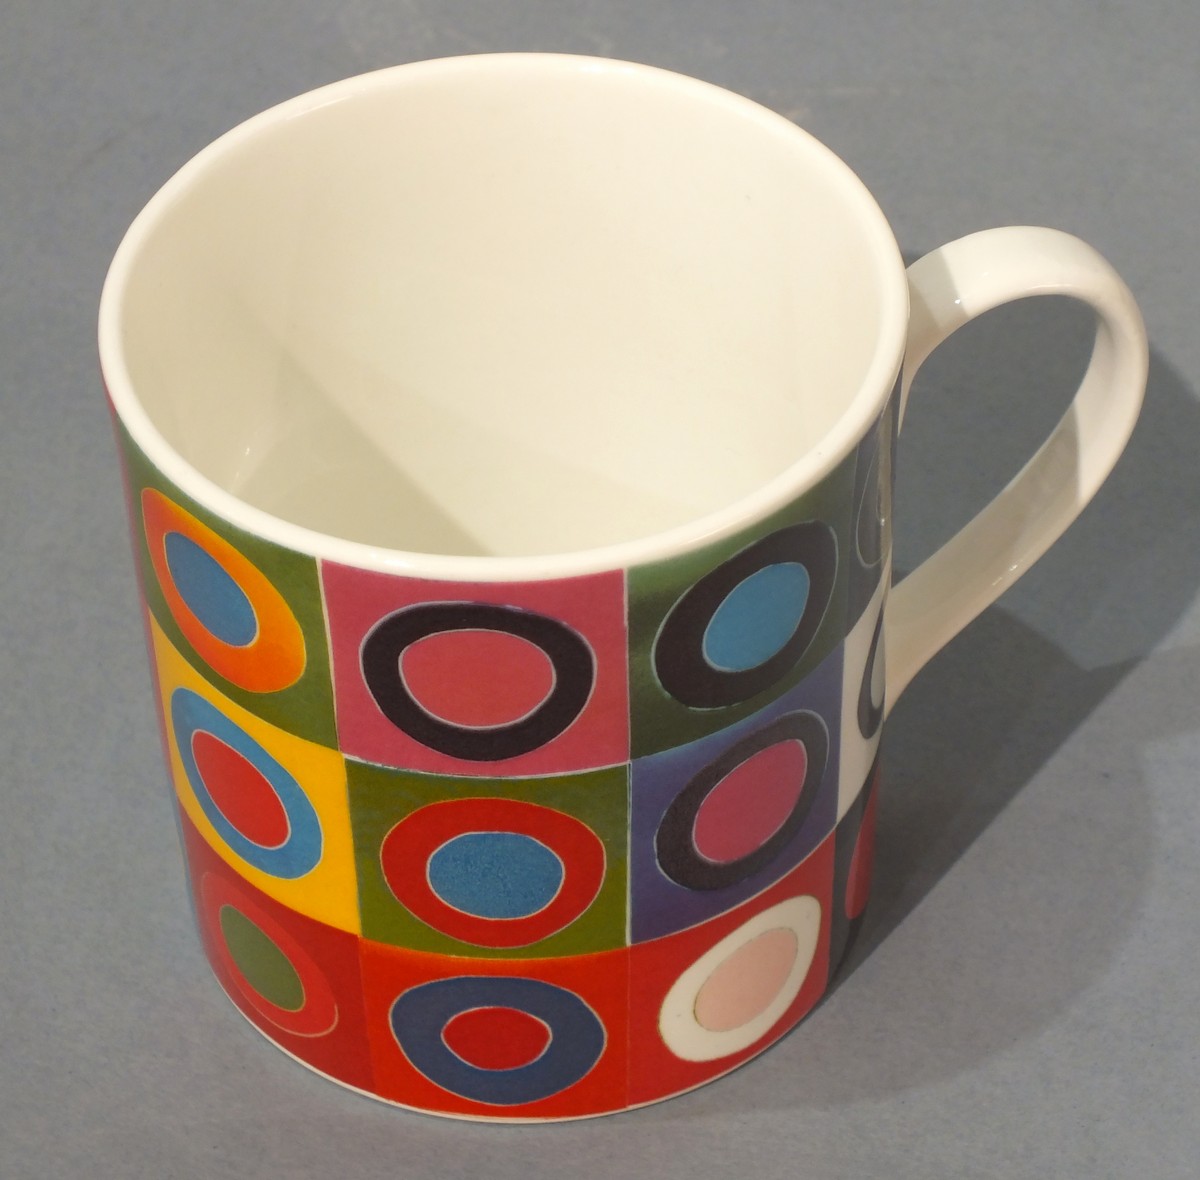 Sir Terry FROST (British 1915-2003) Orchard Tambourine Mug (on behalf of Royal Academy of Arts), - Image 5 of 10